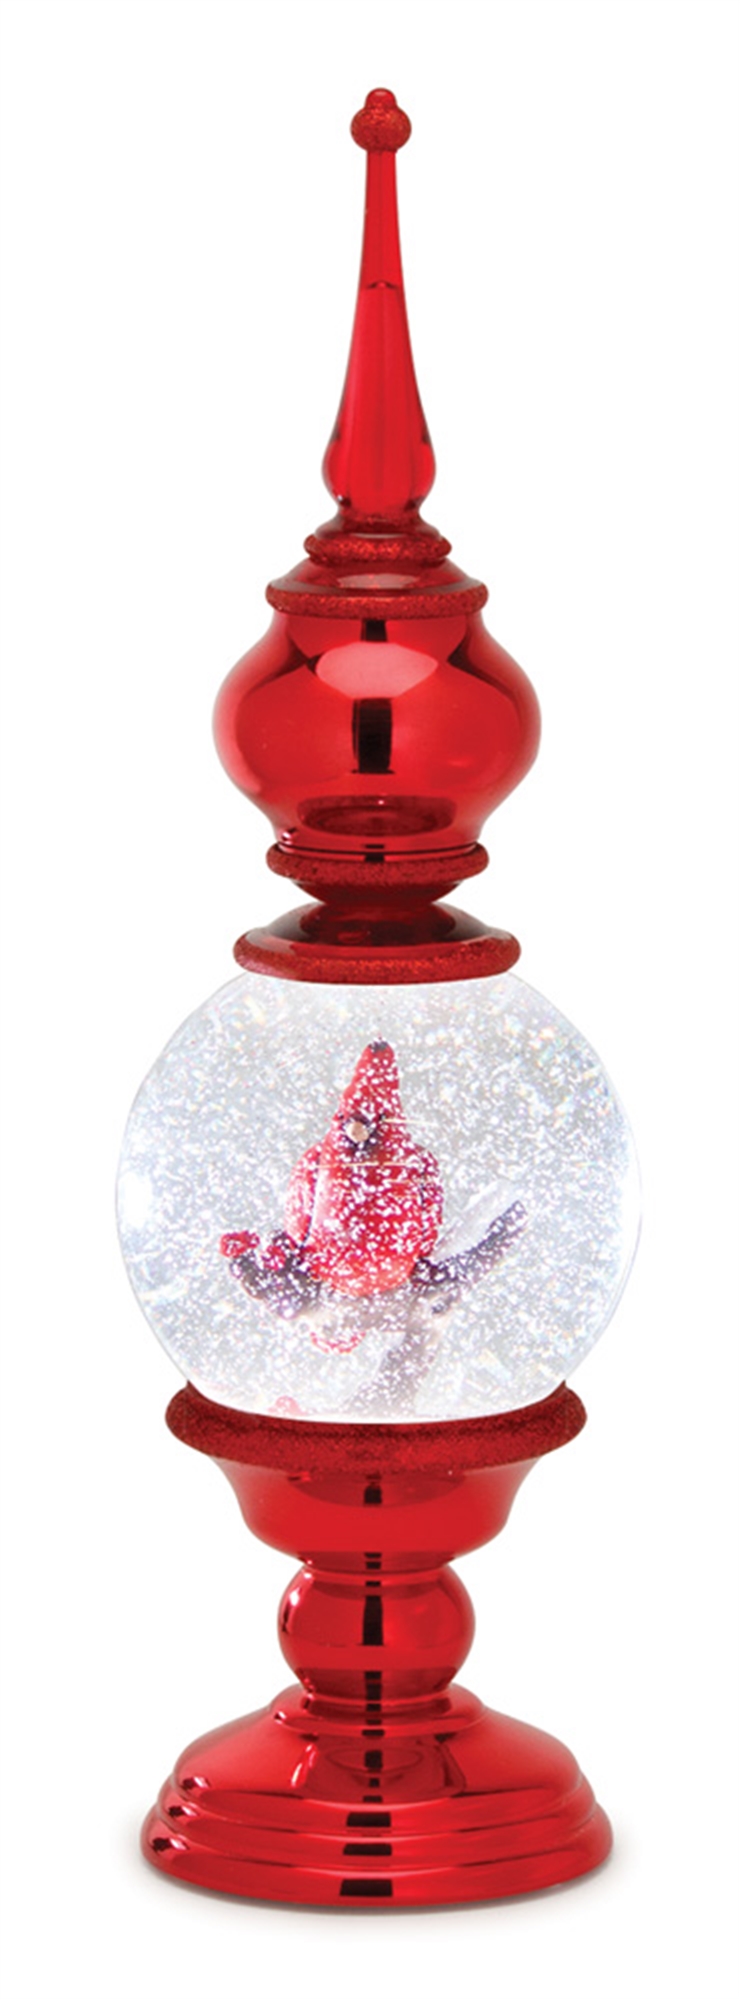 Cardinal Finial Snow Globe 16.5"H Acrylic 6 Hr Timer 3 AA Batteries, Not Included